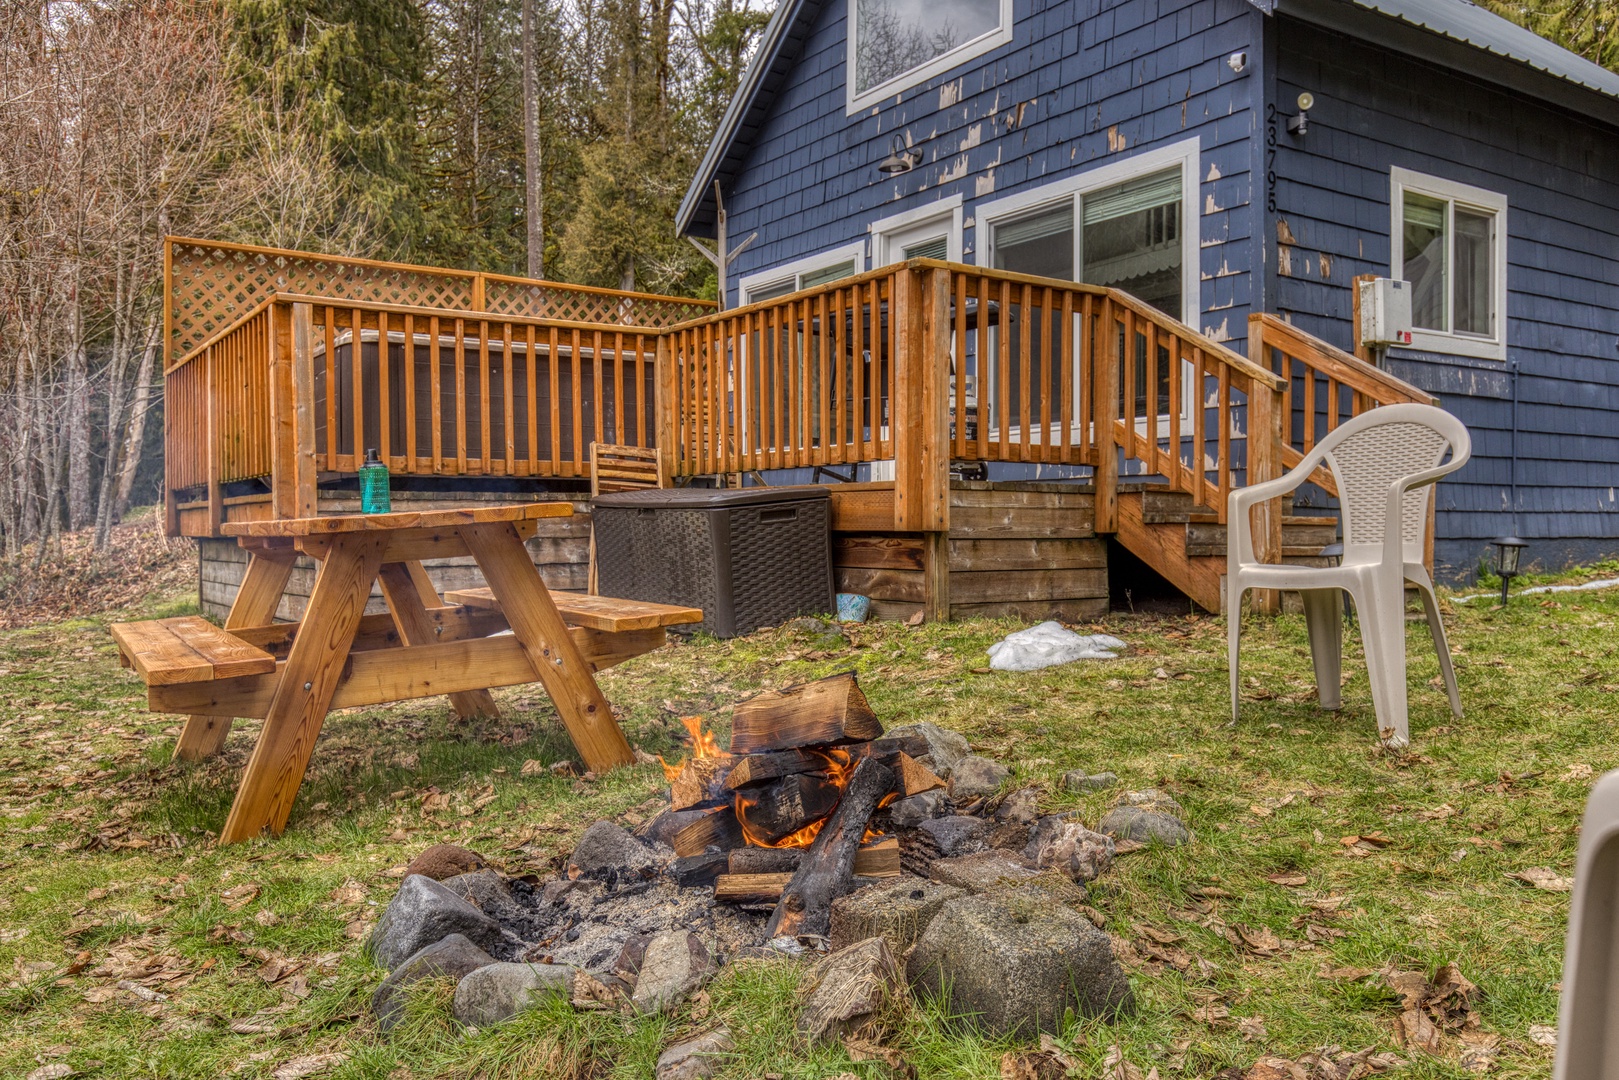 Rhododendron Vacation Rentals, Riverbend Cabin #2 - Spacious back deck with fire/pit